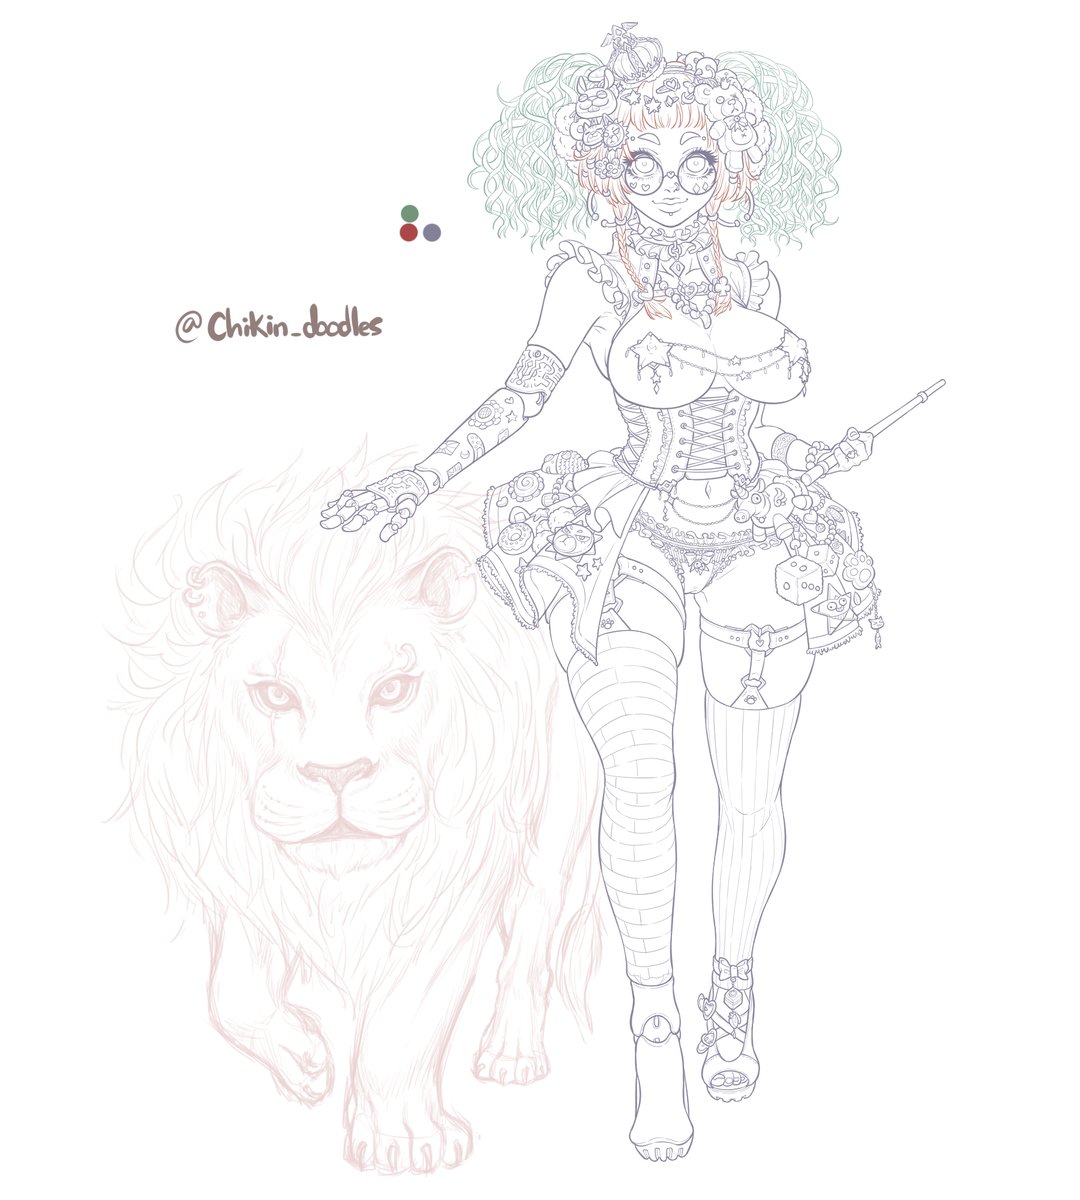 3 days spent... just lineart the girl 😰 am I lacking in speed?
#doodles #lineart #girl #lion #ArtistOnTwitter #ArtistOnFiverr #harajukustyle #art #sketch